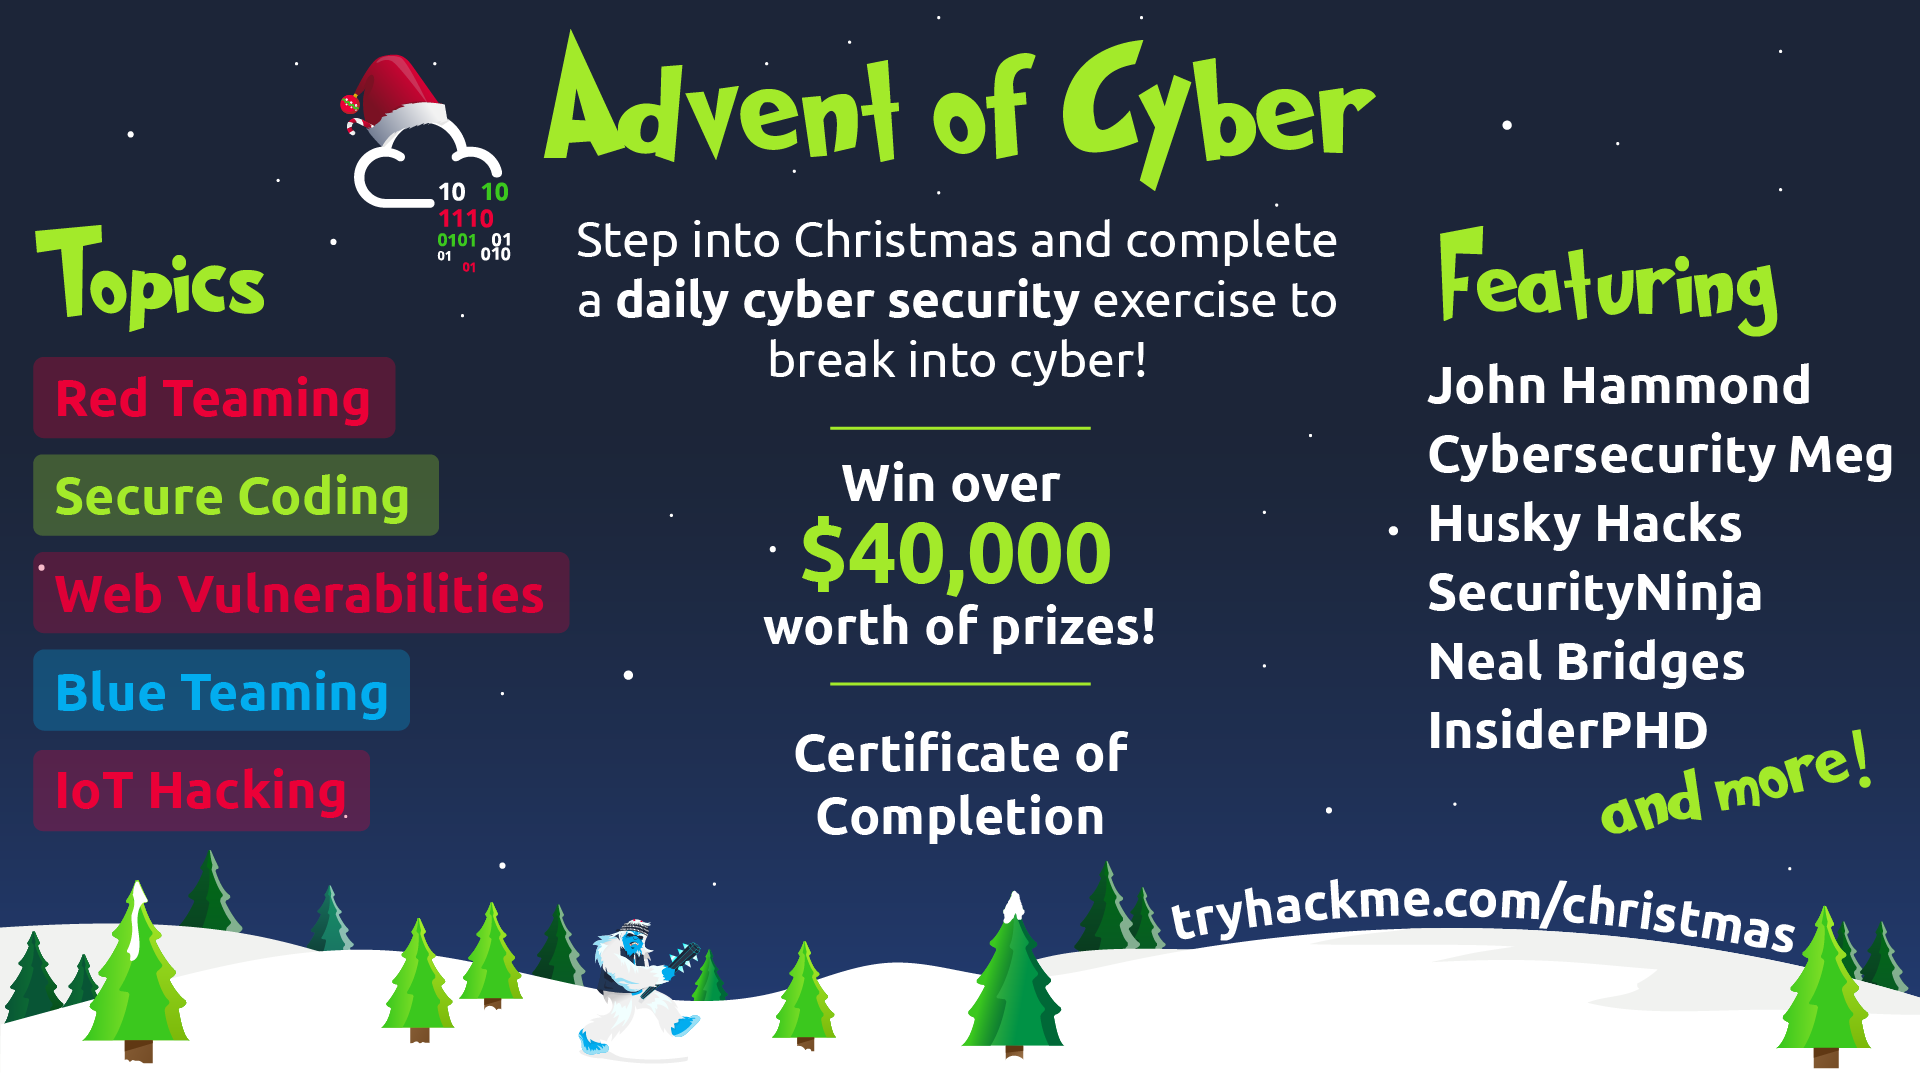 Take part in TryHackMe’s Advent of Cyber 2022 to learn cyber security and win up to $40,000 worth of prizes